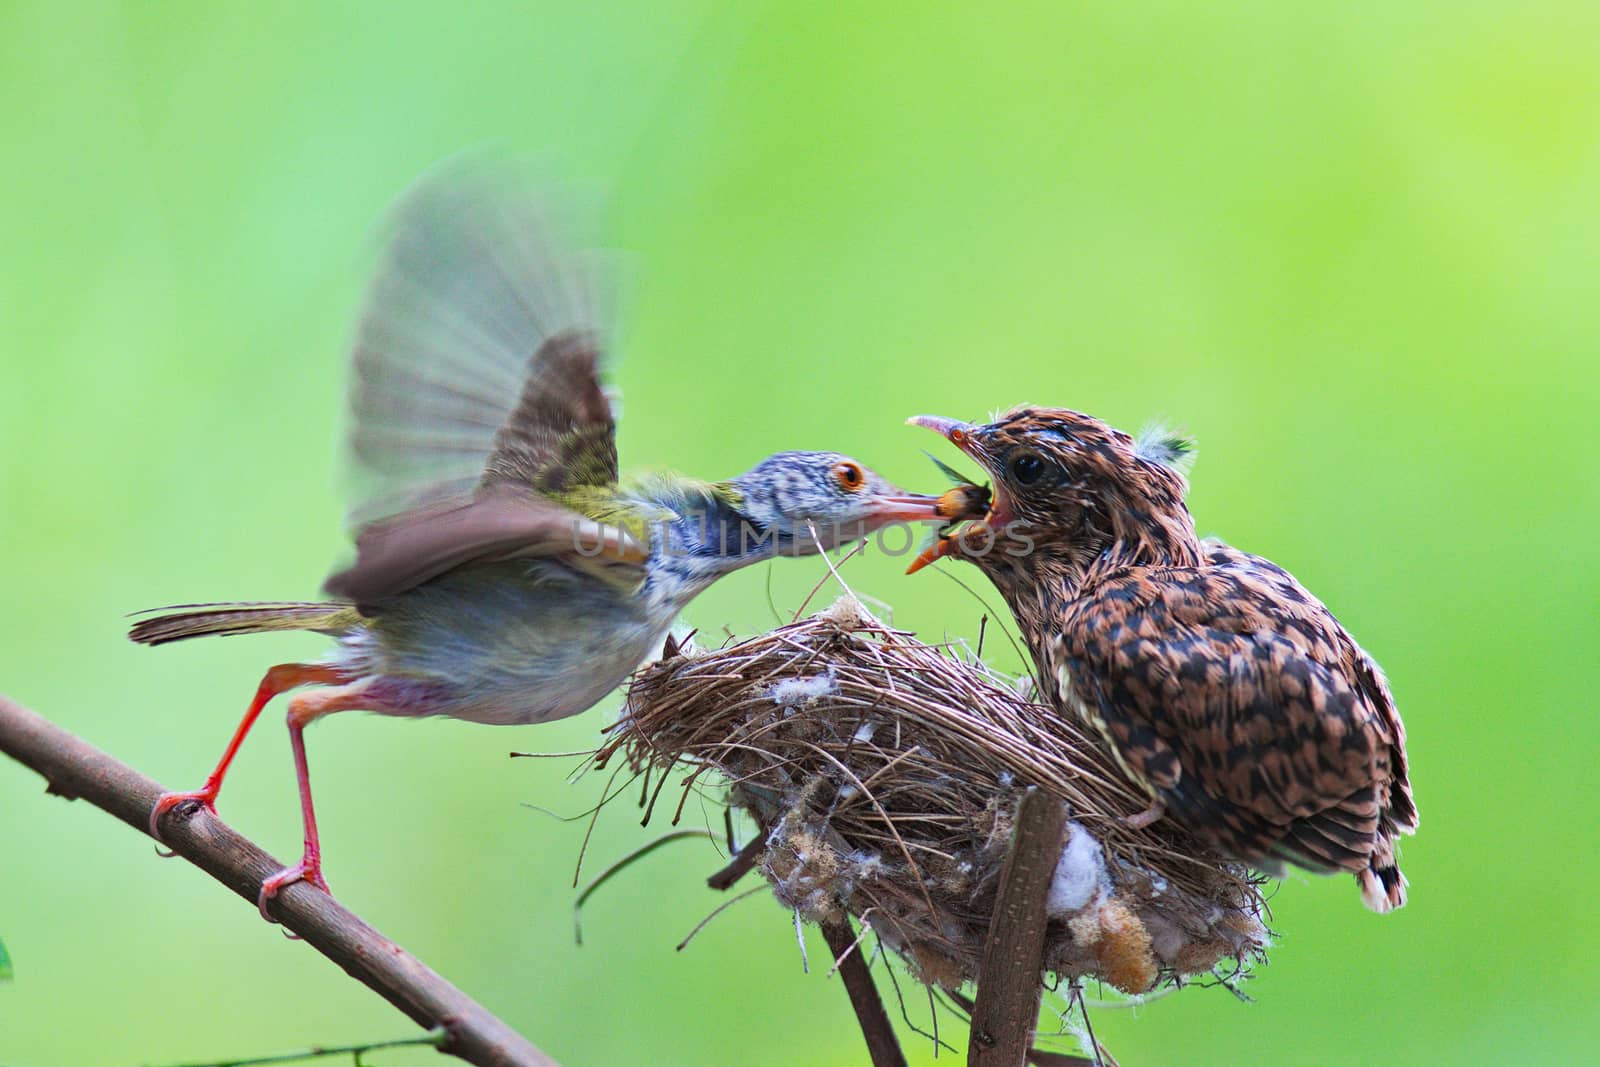 A Song thrush mother feeding her hungry chicks in the nest